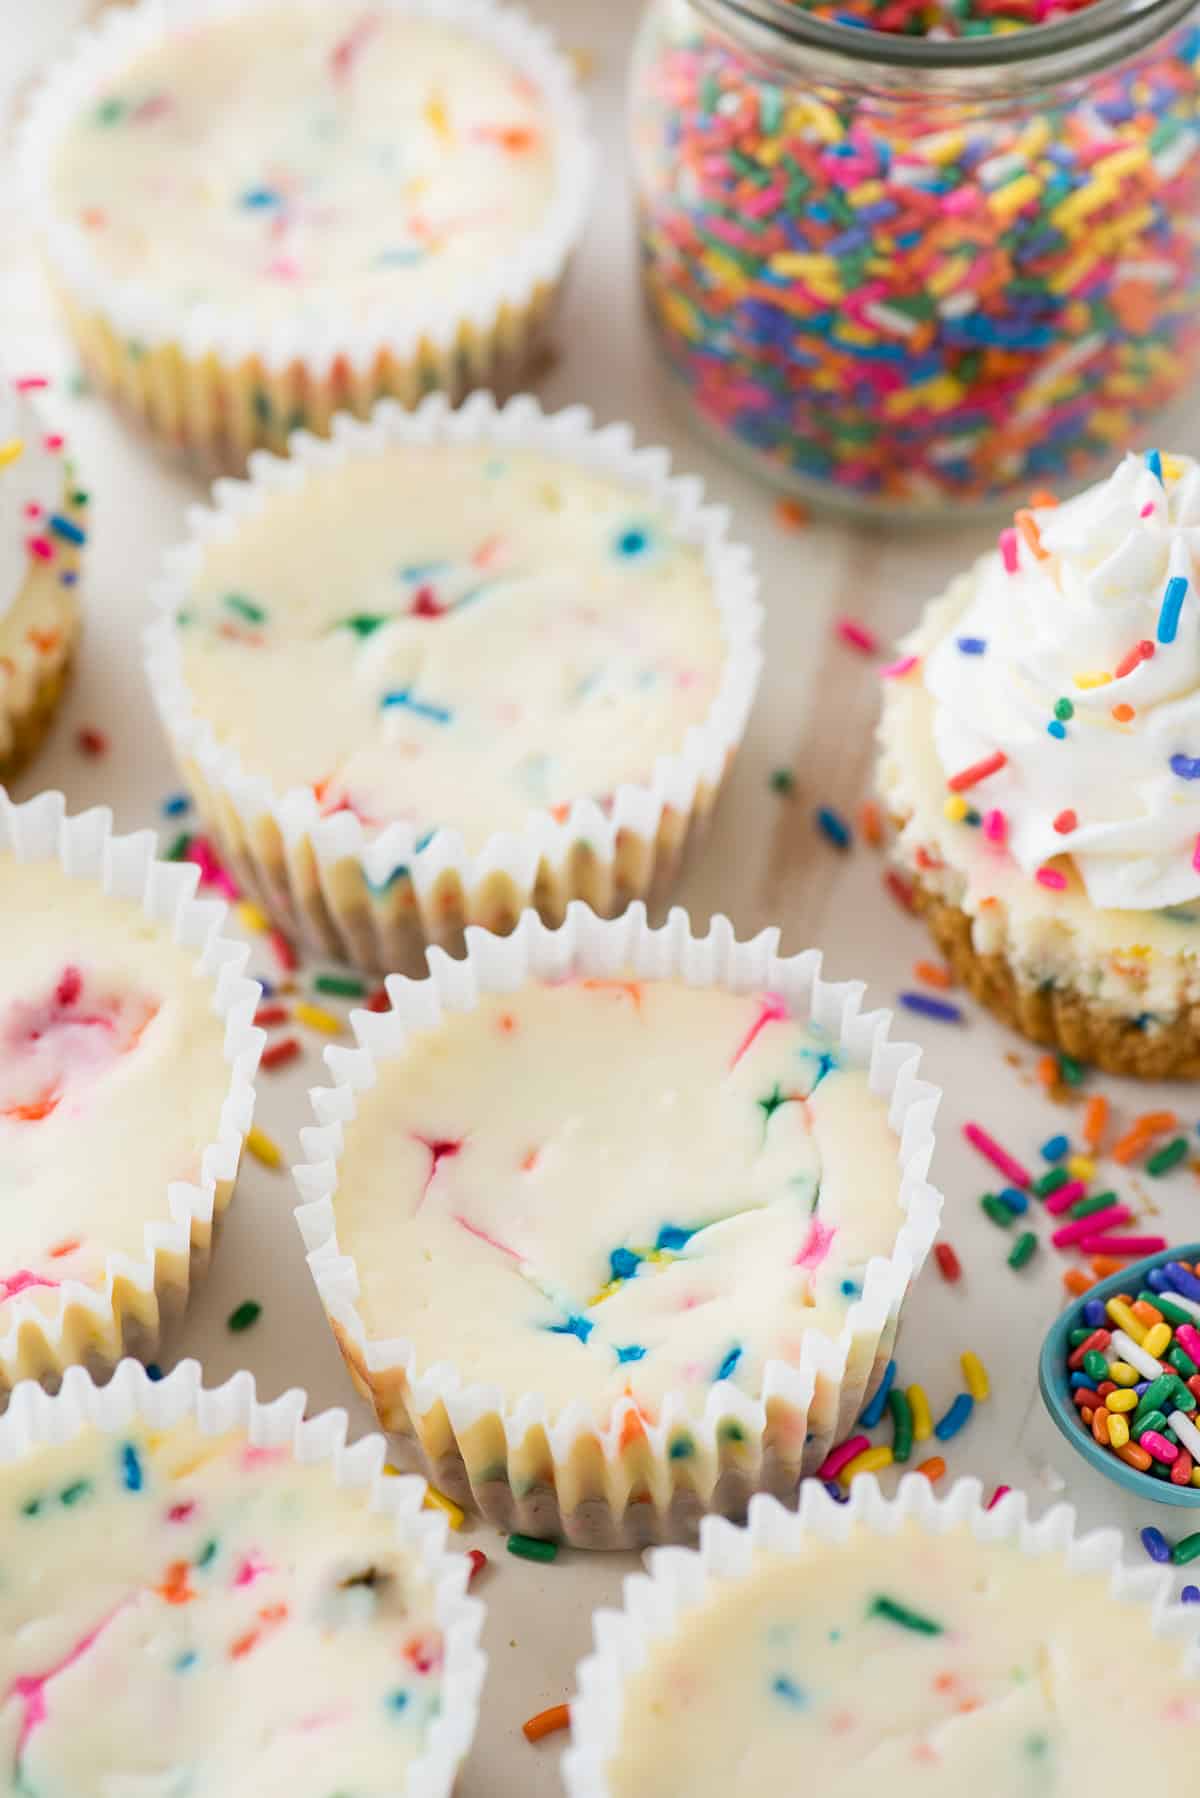 mini funfetti cheesecakes in a row with rainbow colored sprinkles on top